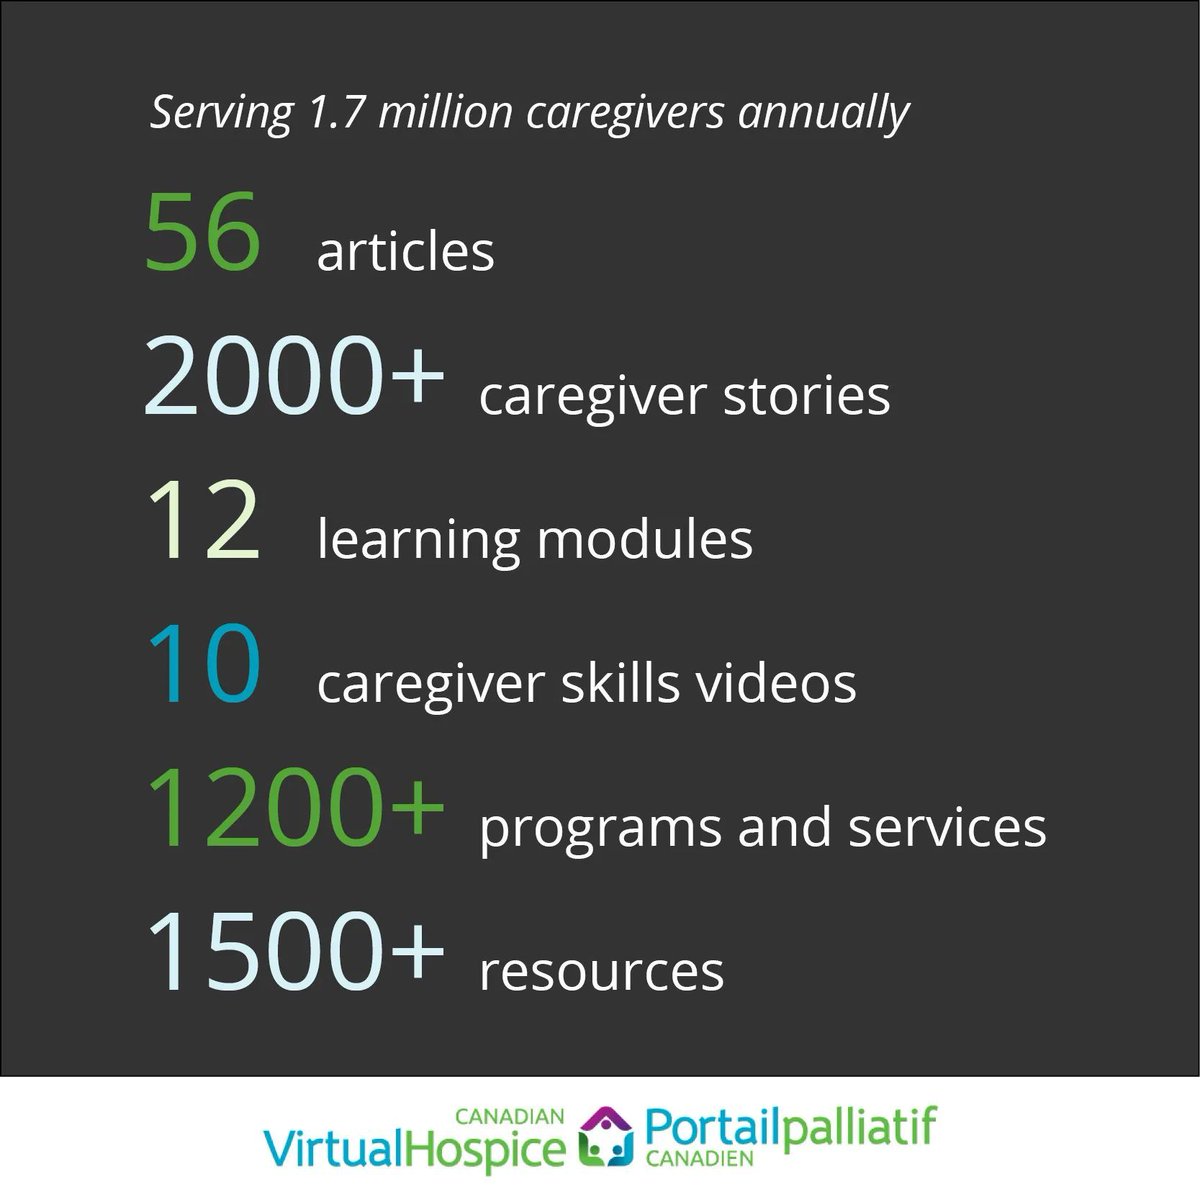 On #NationalCaregivingDay we are are highlighting key caregiver resources. Canadian Virtual Hospice is the most comprehensive caregiver portal in Canada for those living with advanced illness.